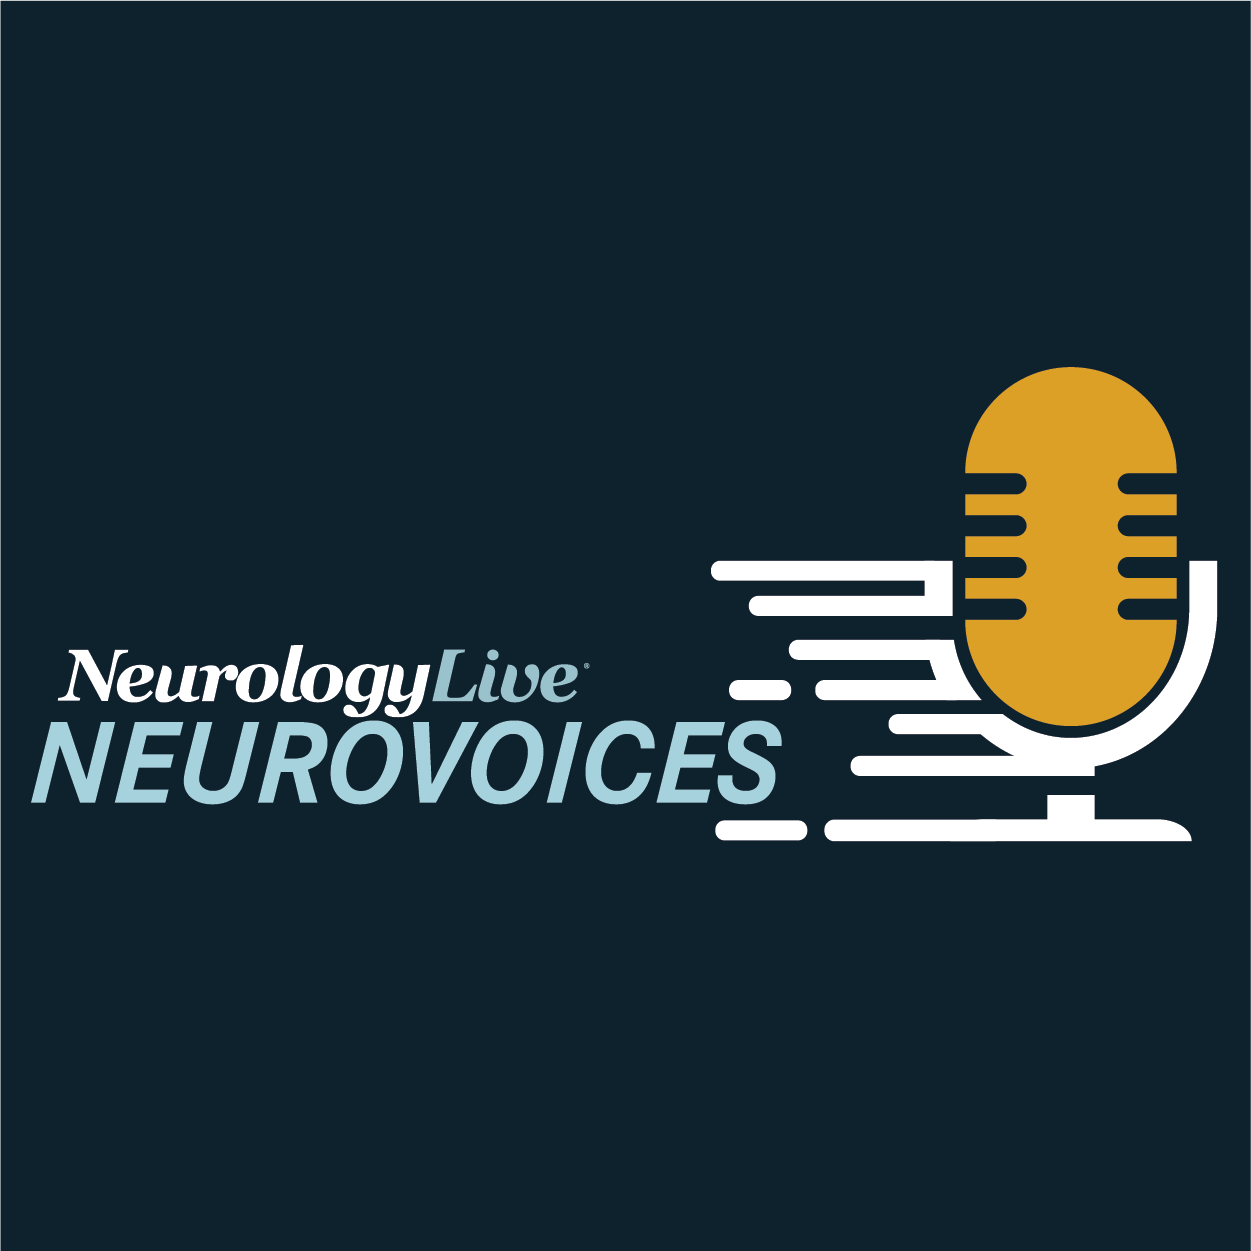 NeuroVoices: Barry Singer, MD, on Recent Strides in the Treatment and Management of Multiple Sclerosis